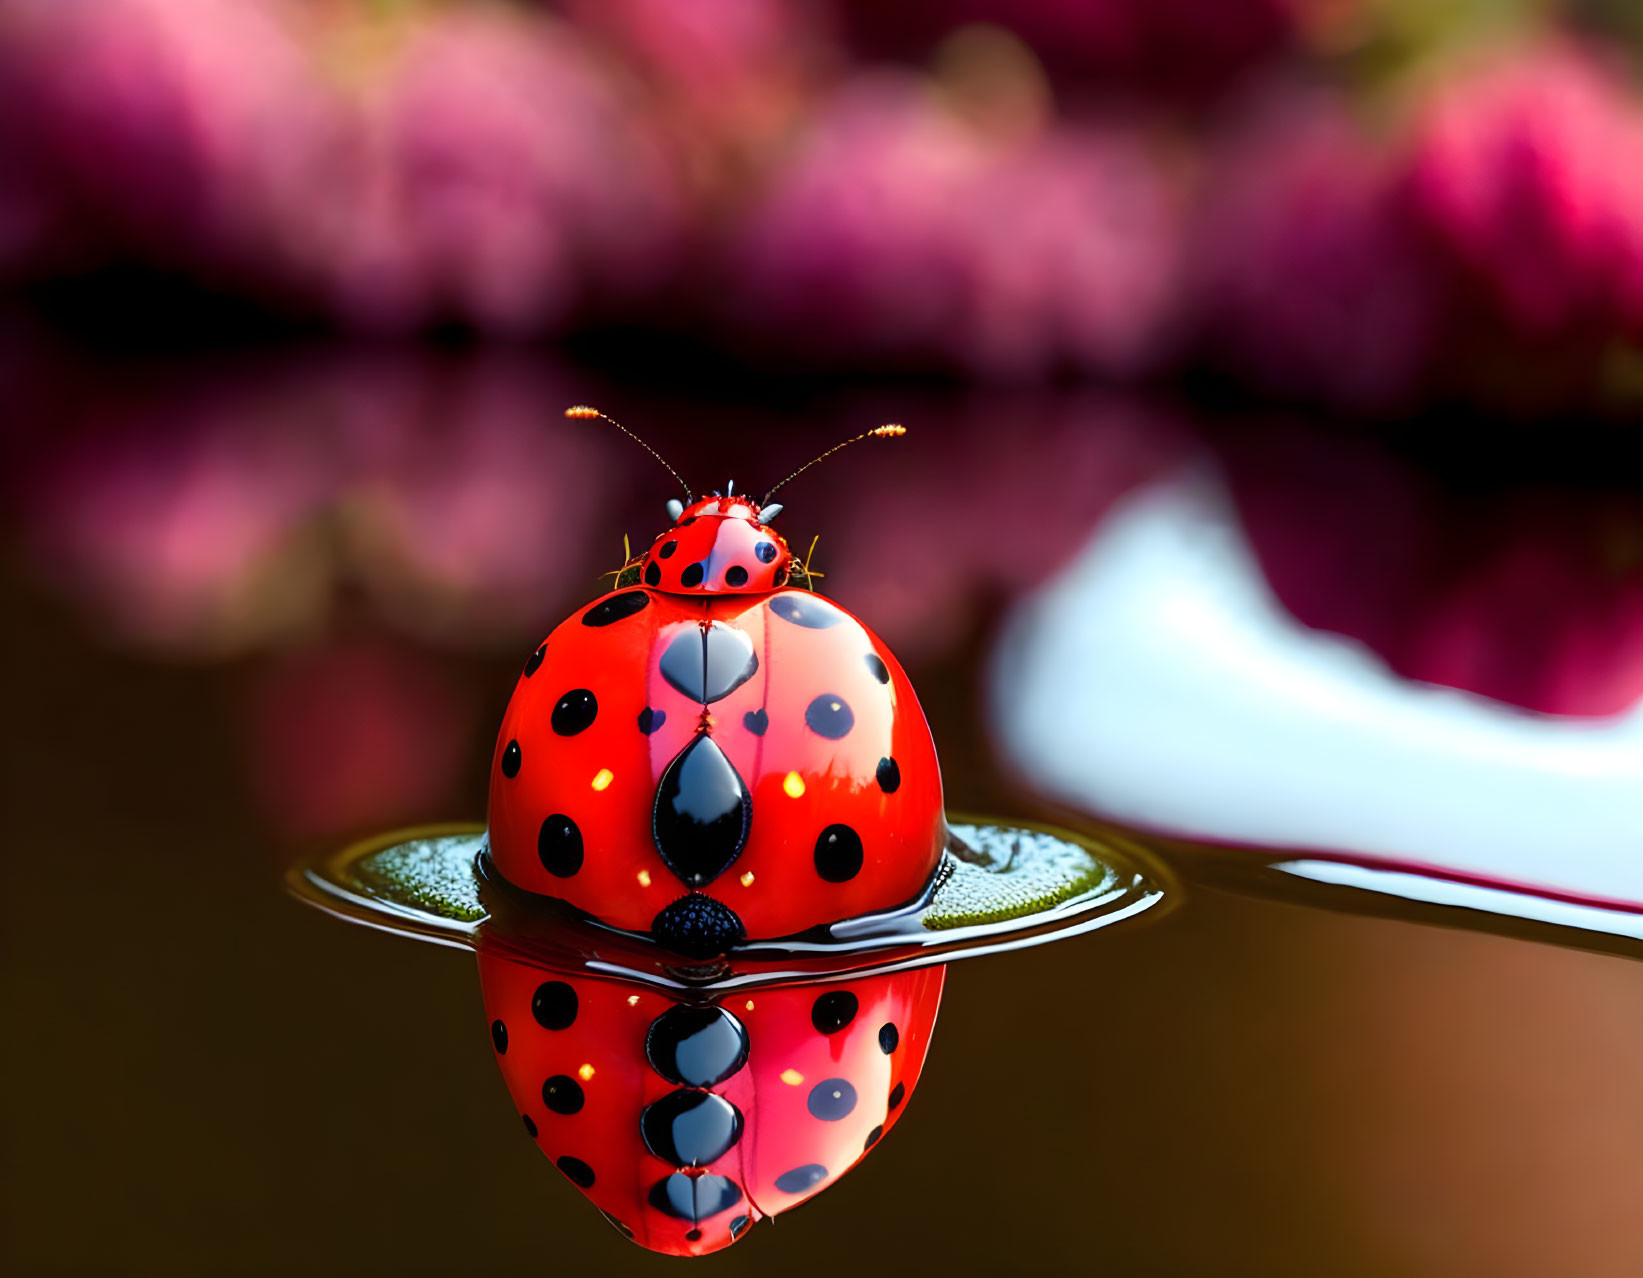 Red ladybug with black spots reflected on water surface against blurred pink floral background